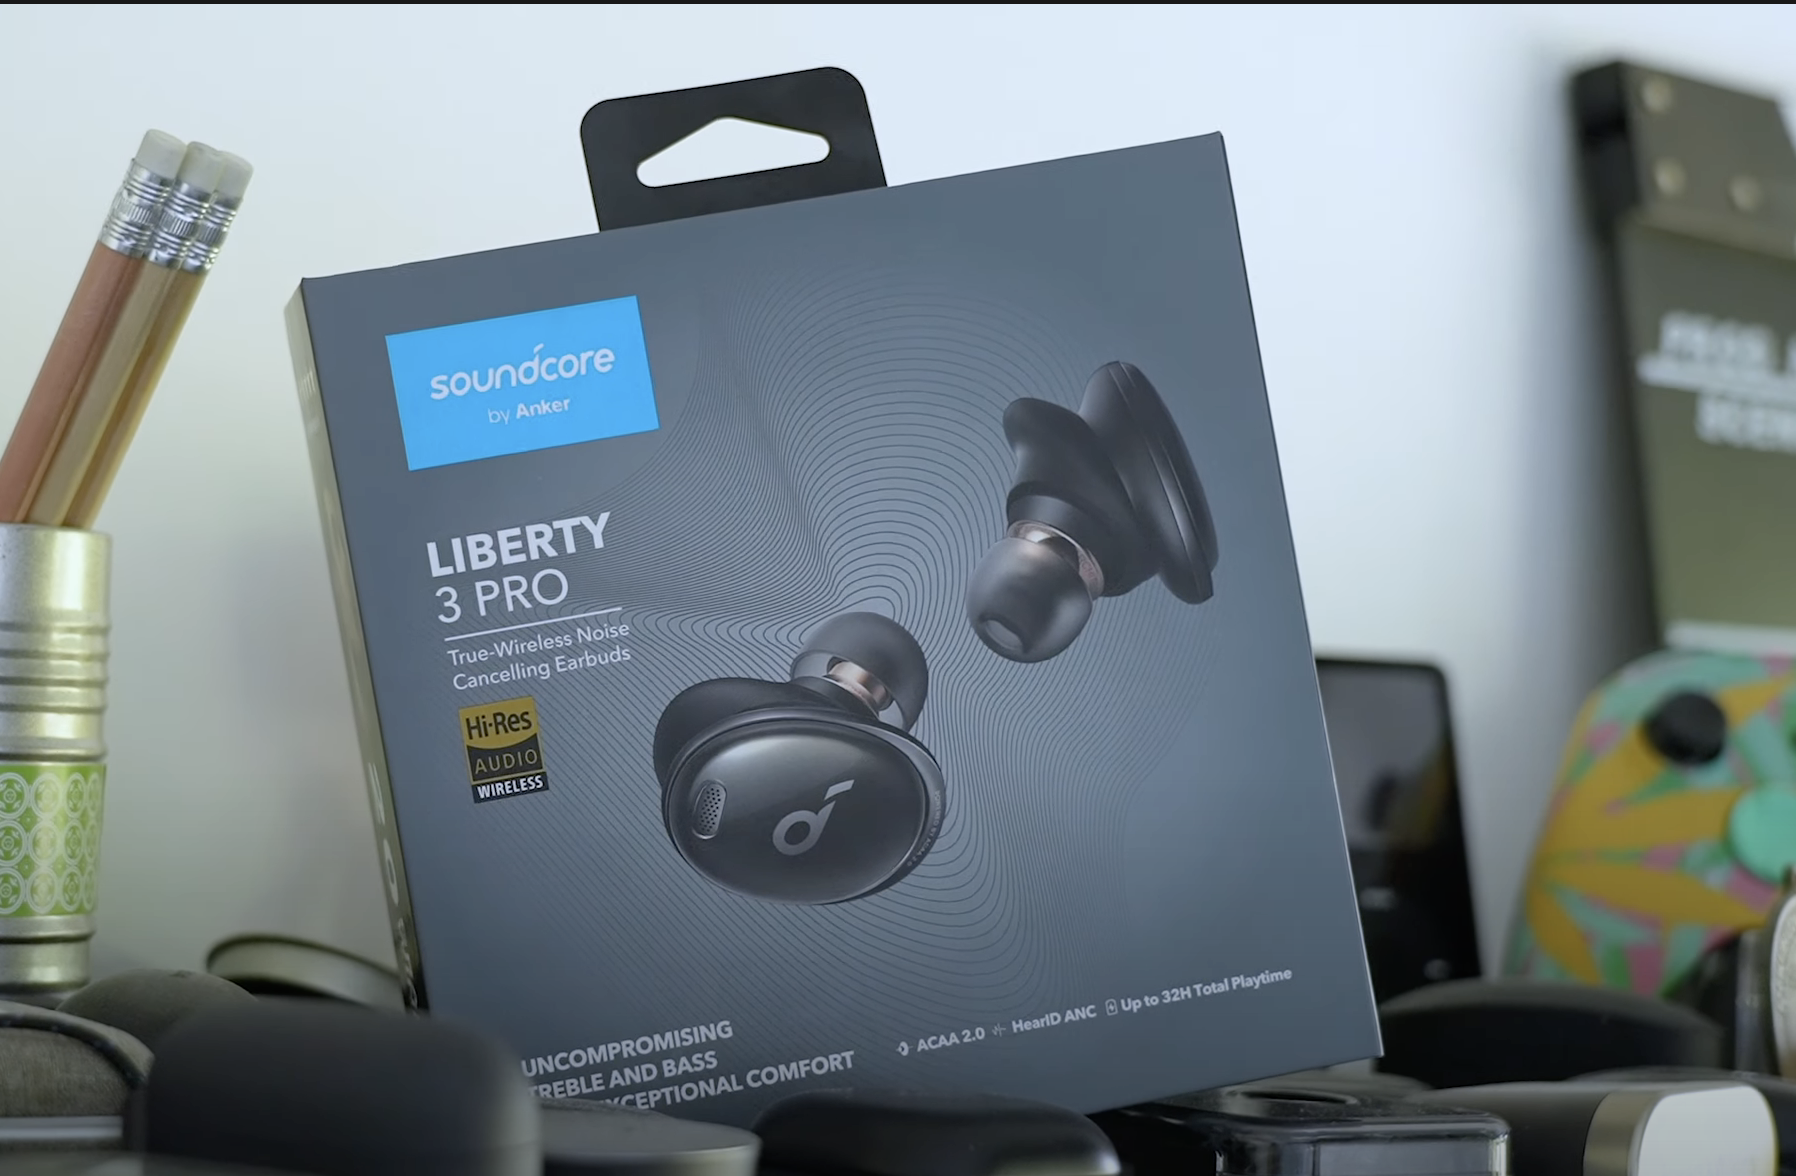 Liberty 3 Pro, True-Wireless Noise Cancelling Earbuds